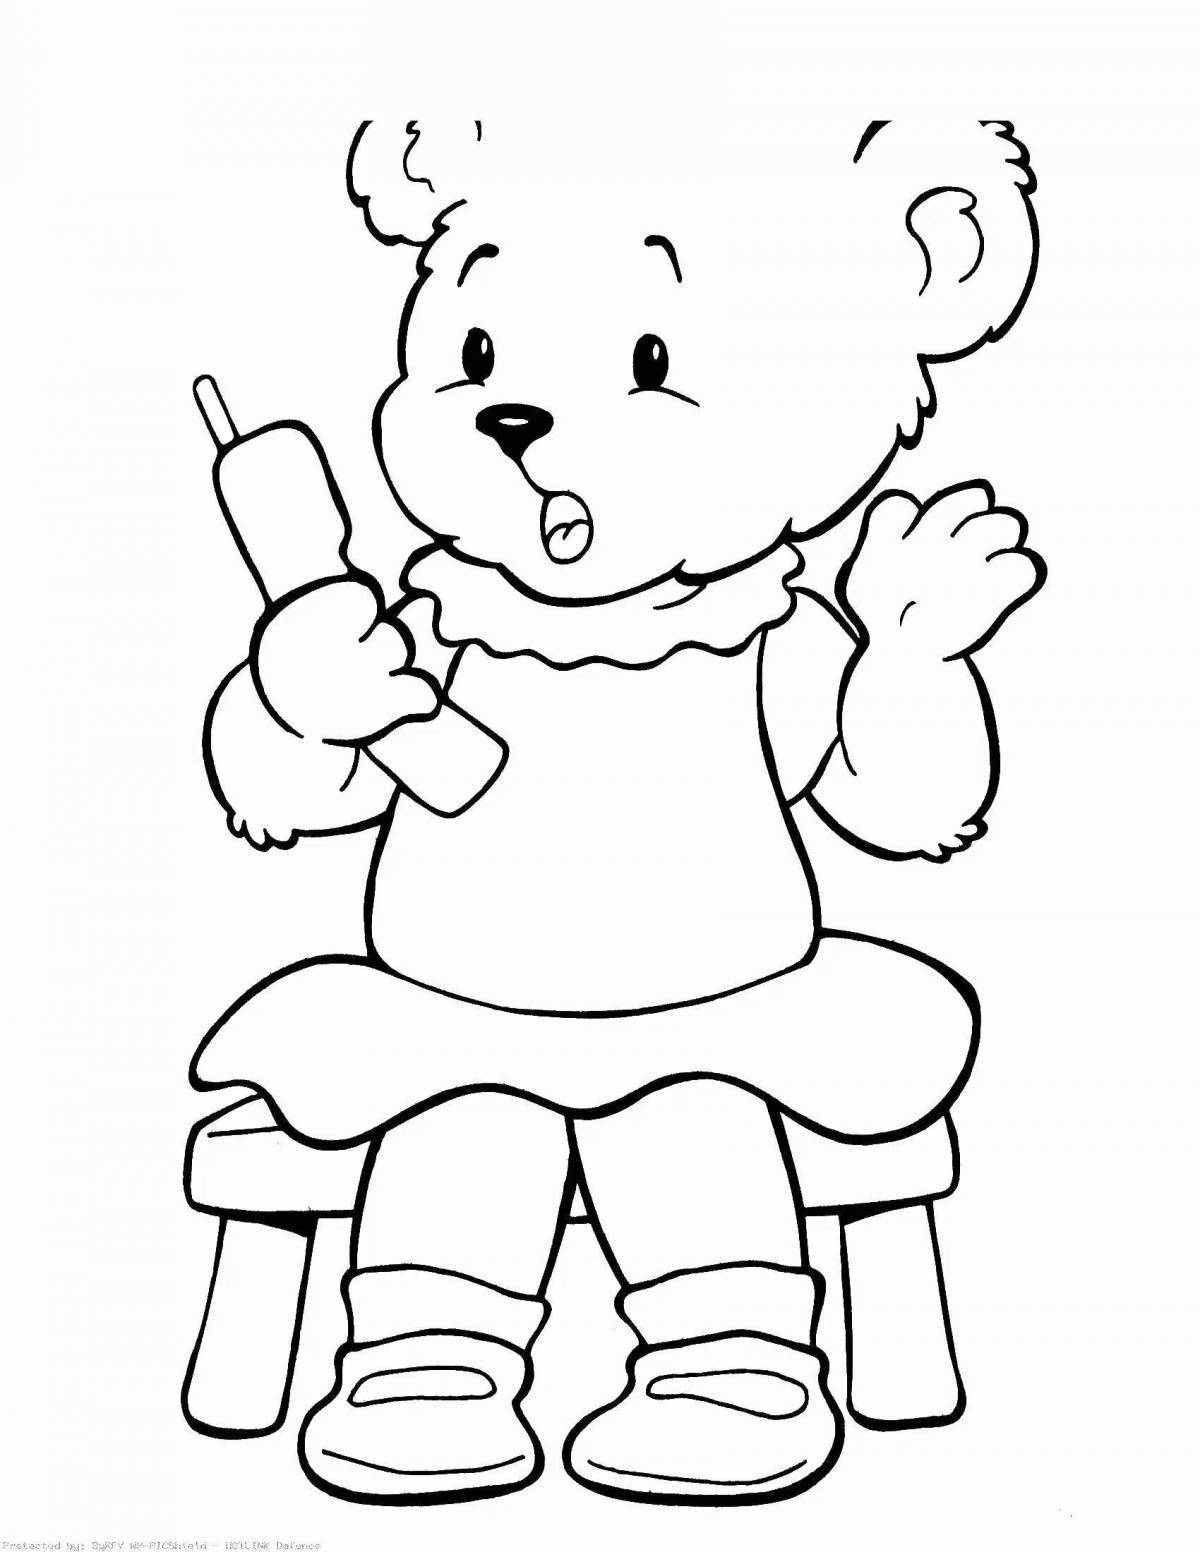 Coloring book bright teddy bear in children's pants